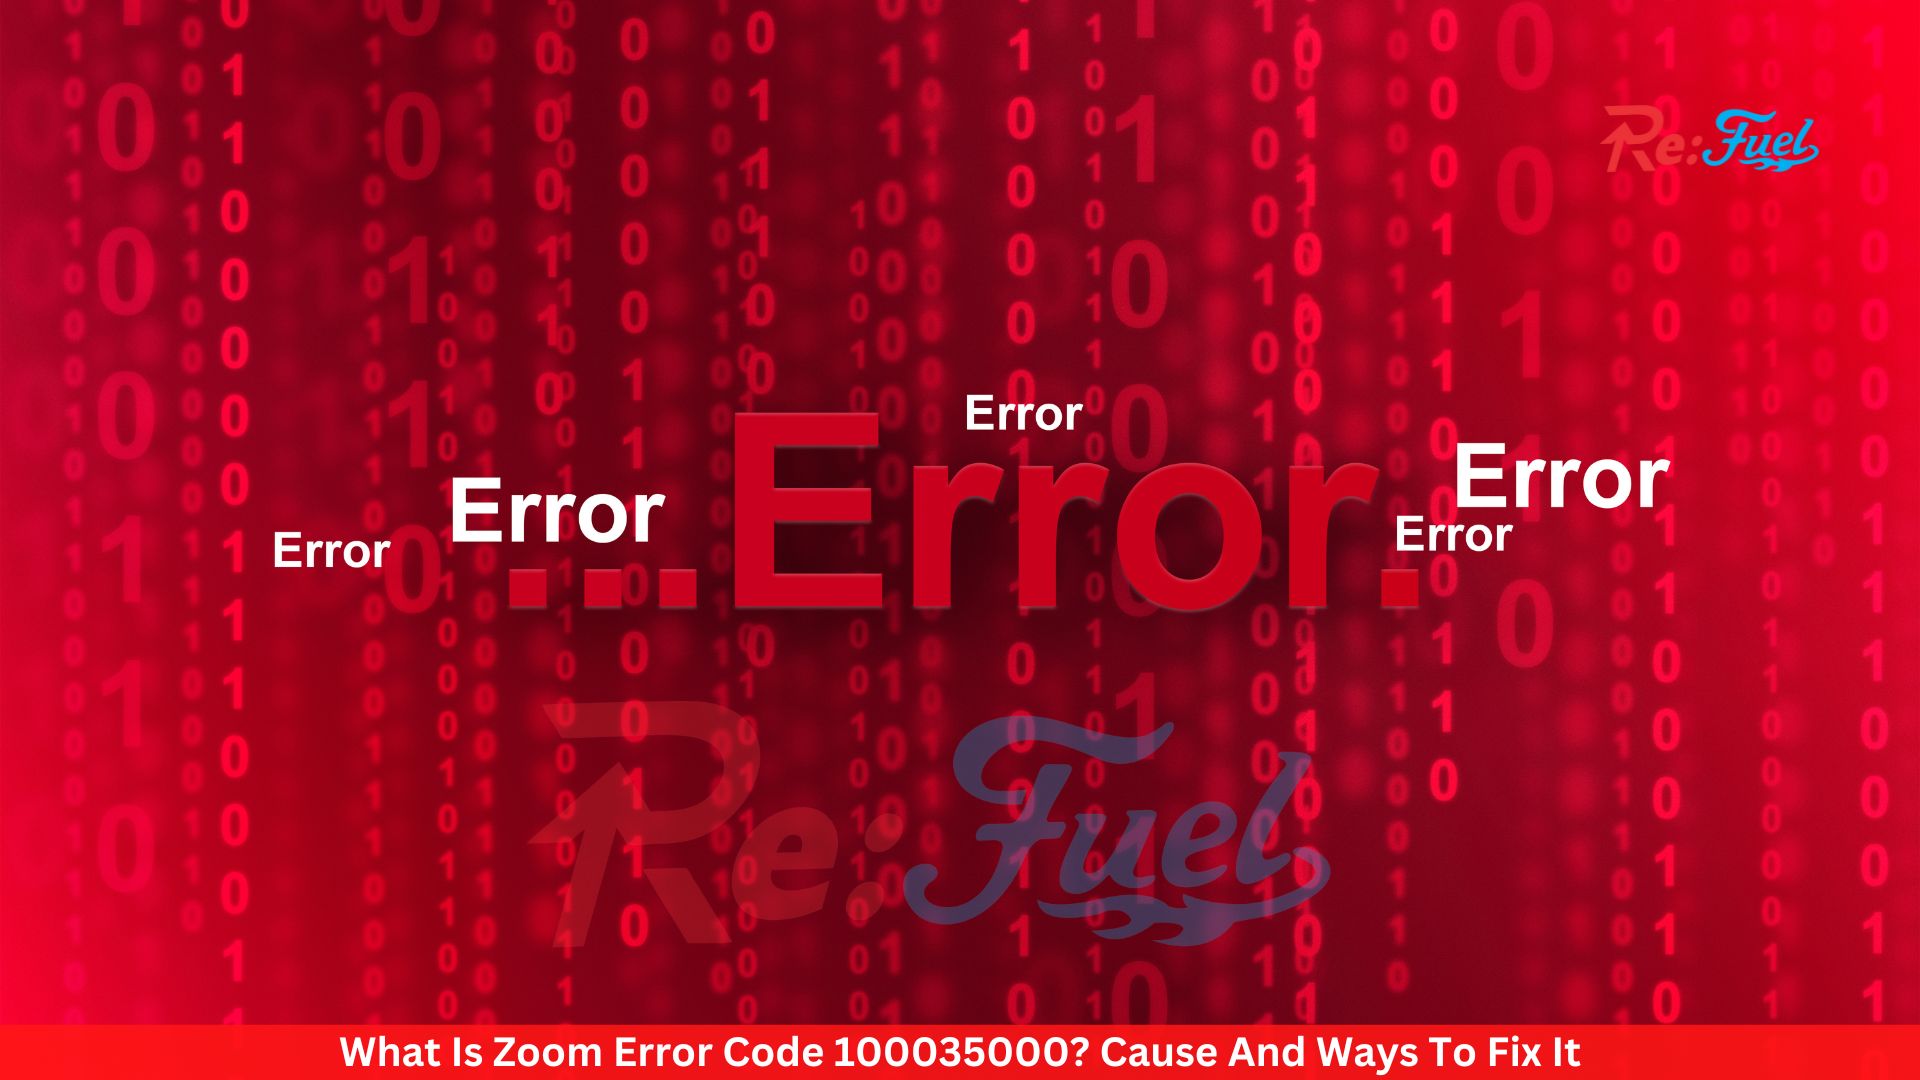 What Is Zoom Error Code 100035000? Cause And Ways To Fix It